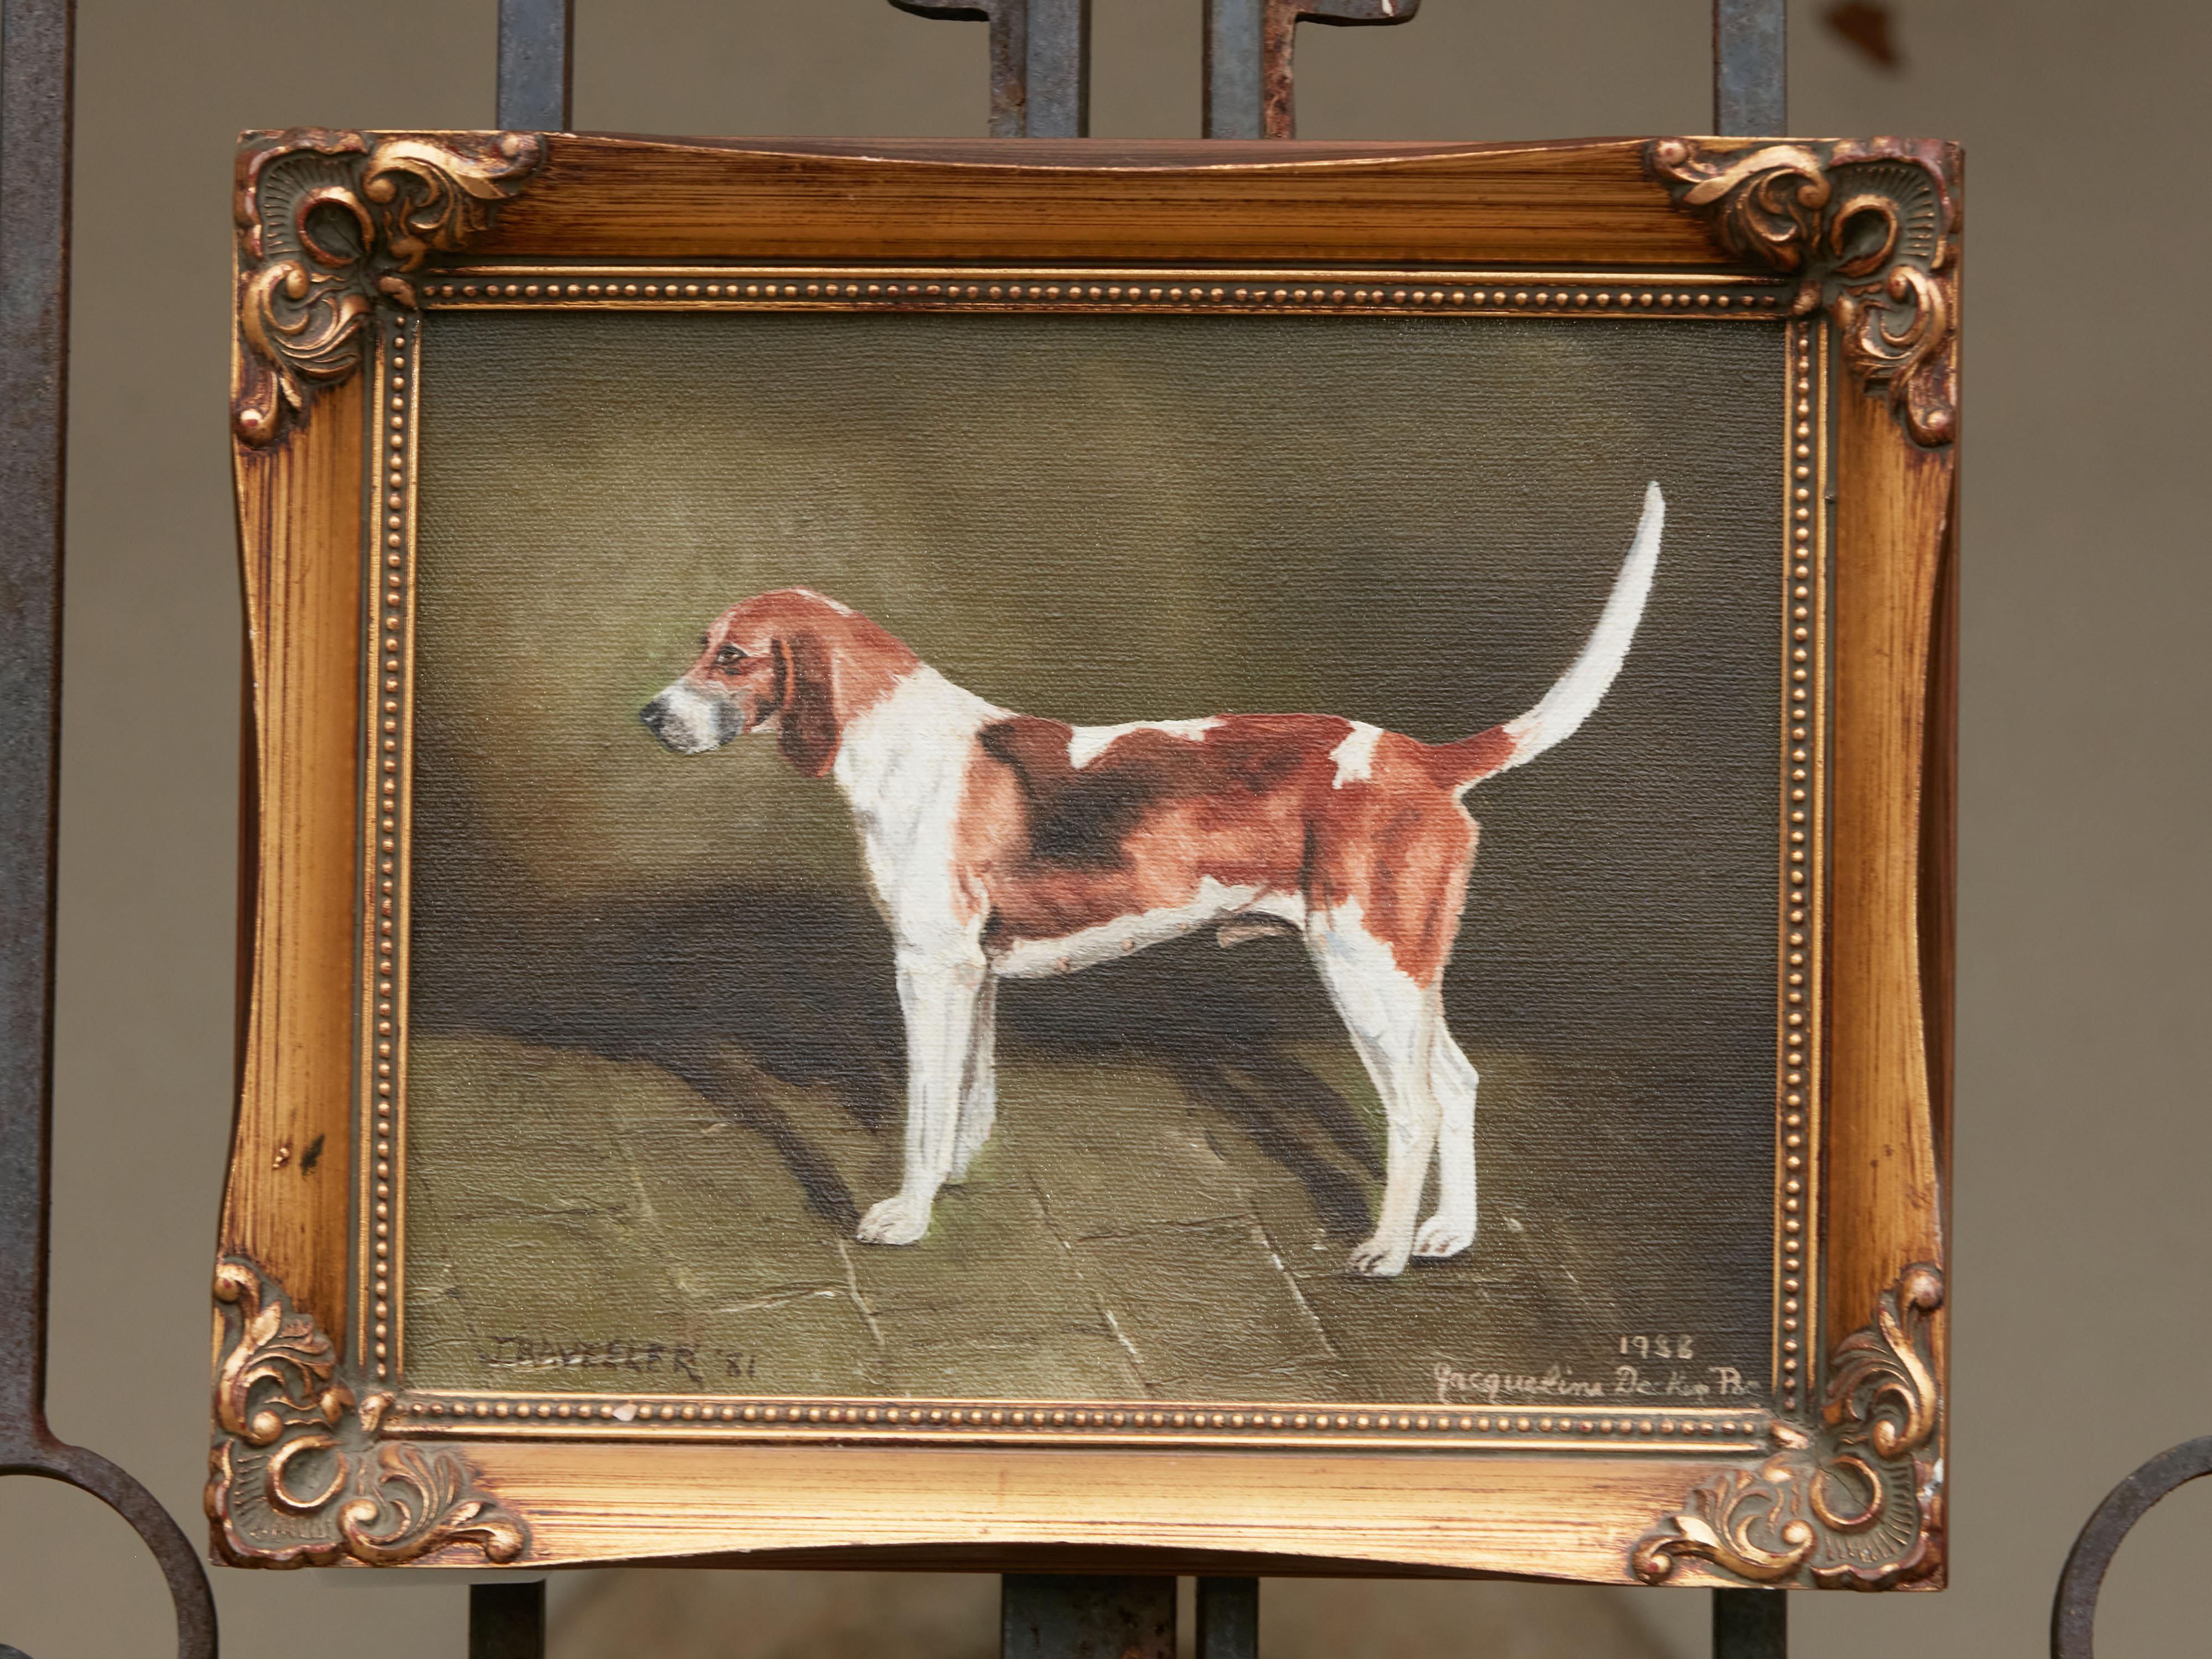 Oil on Canvas Dog Painting Depicting a Belvoir Hound, Signed Jacqueline Decker 2